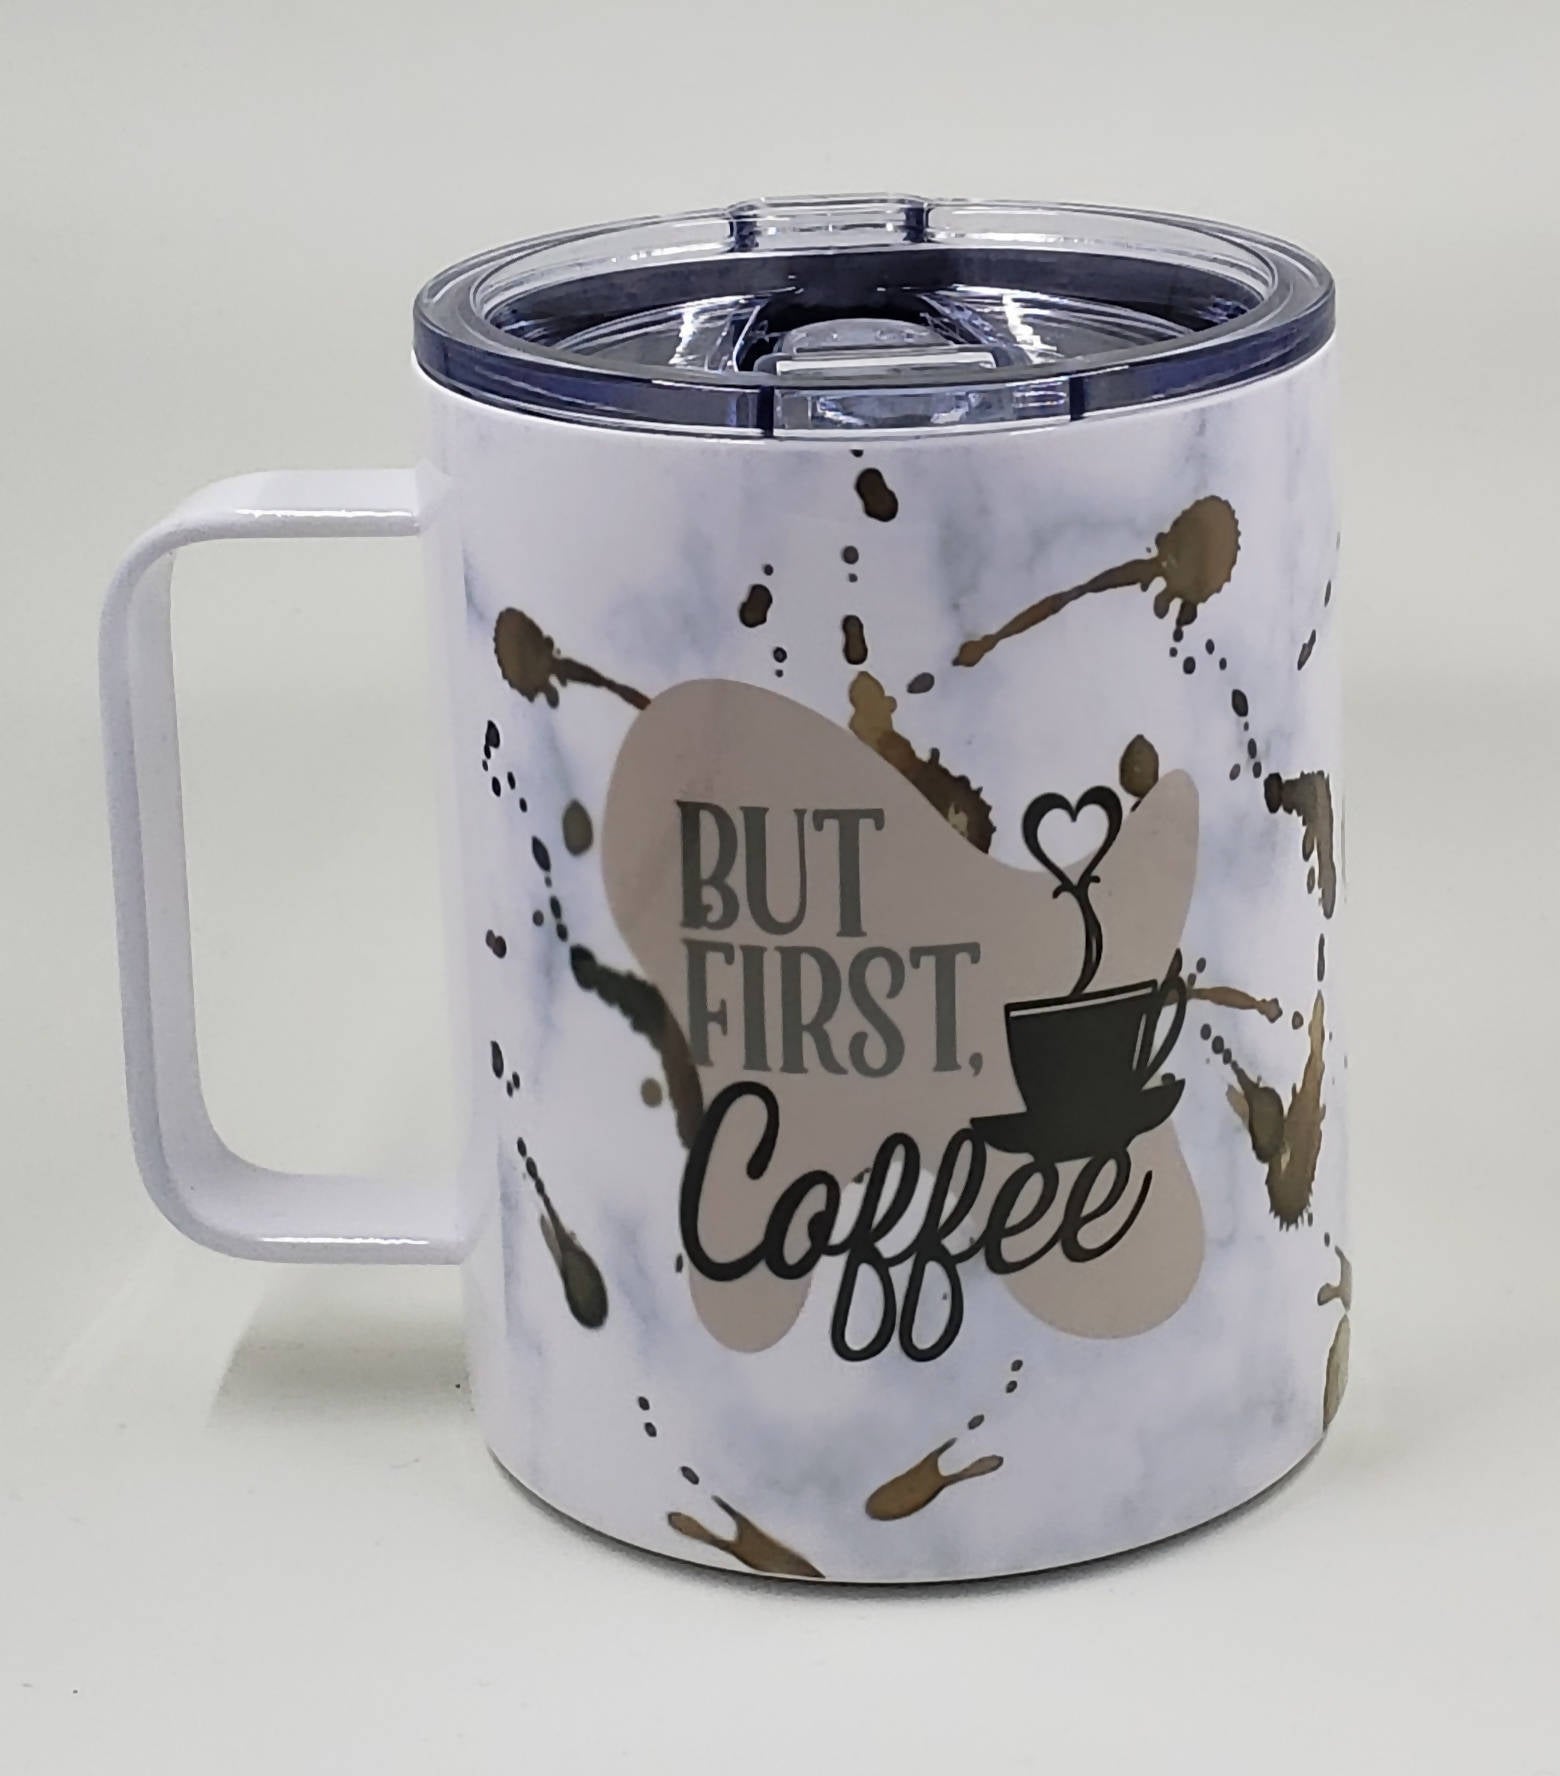 12oz. Stainless Coffee Mug with Lid - But First Coffee